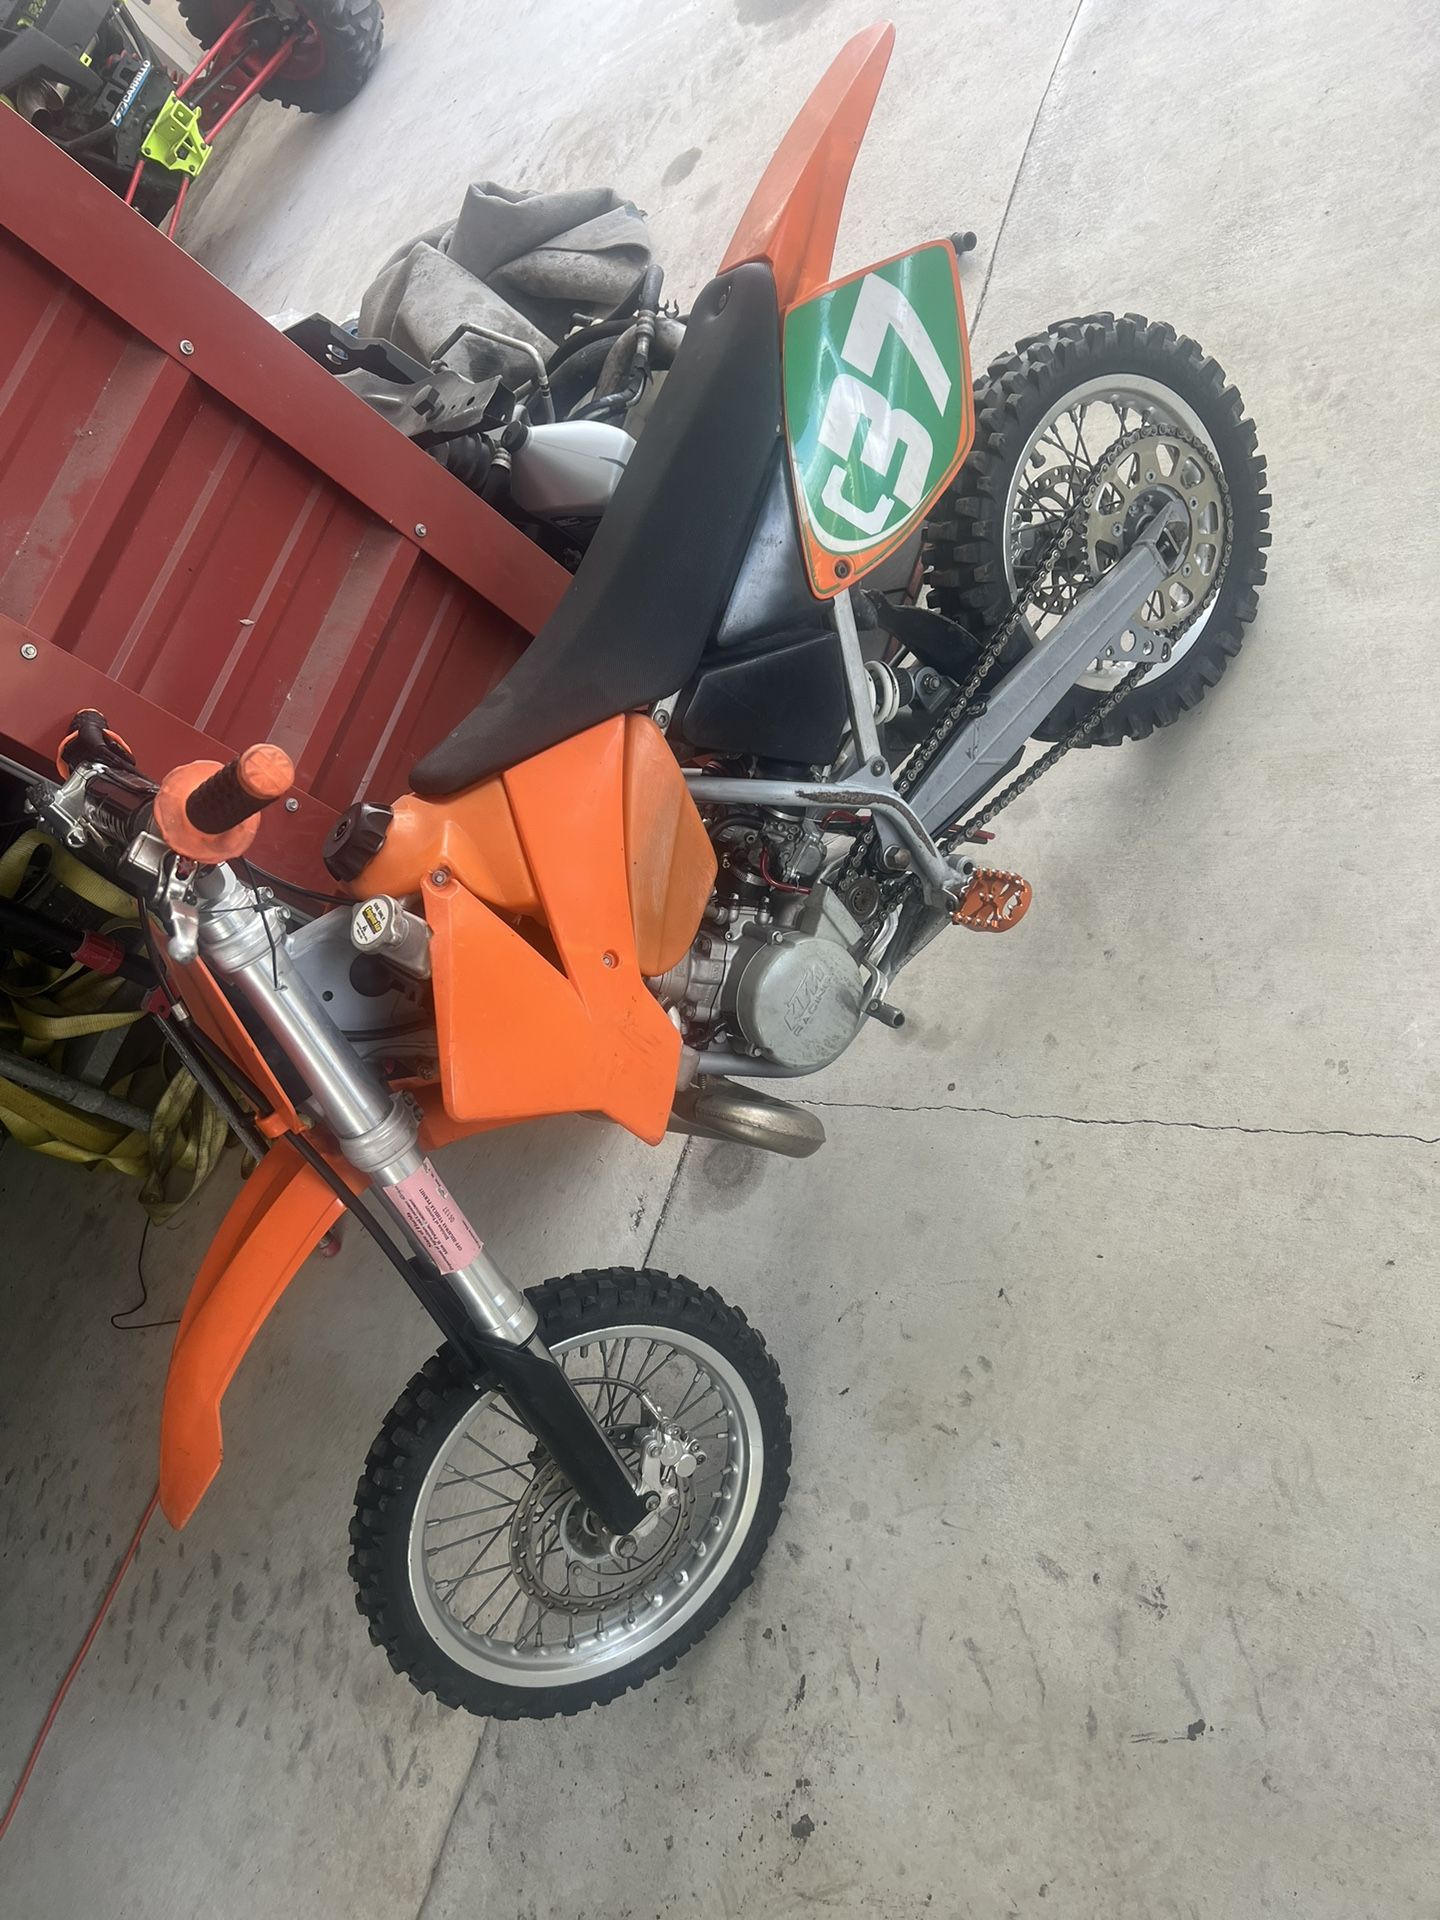 Ktm 65 SX with title 2006 